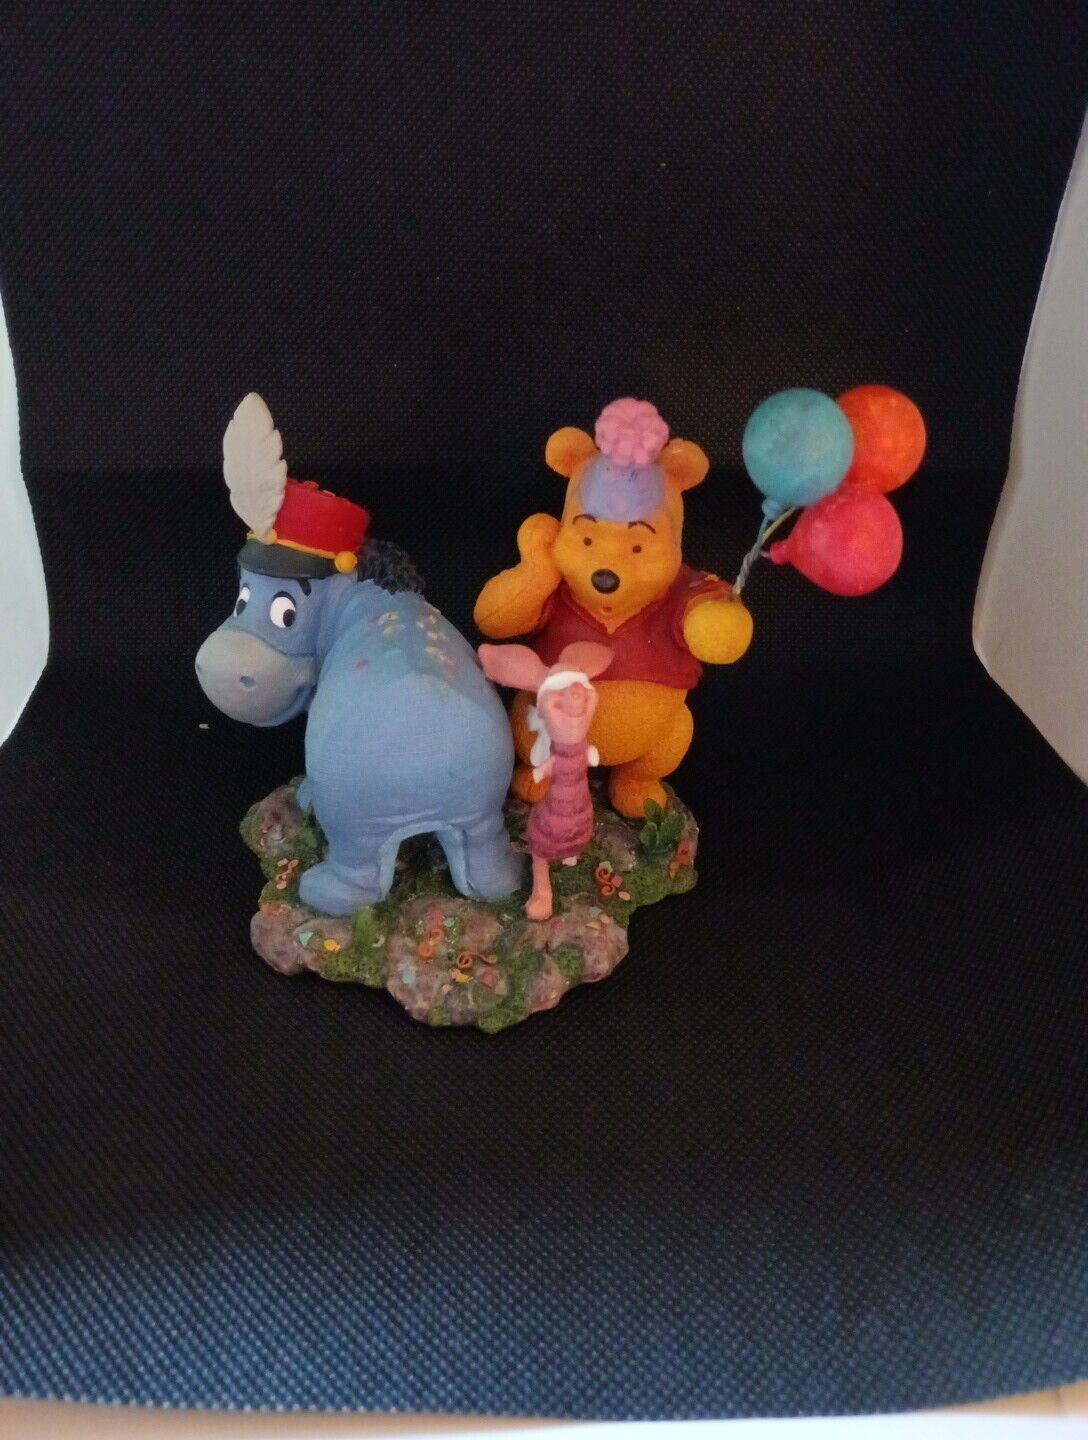 Simply Pooh RETIRED “Wishing You Birthday Merriment and Such” Figurine 4.5”